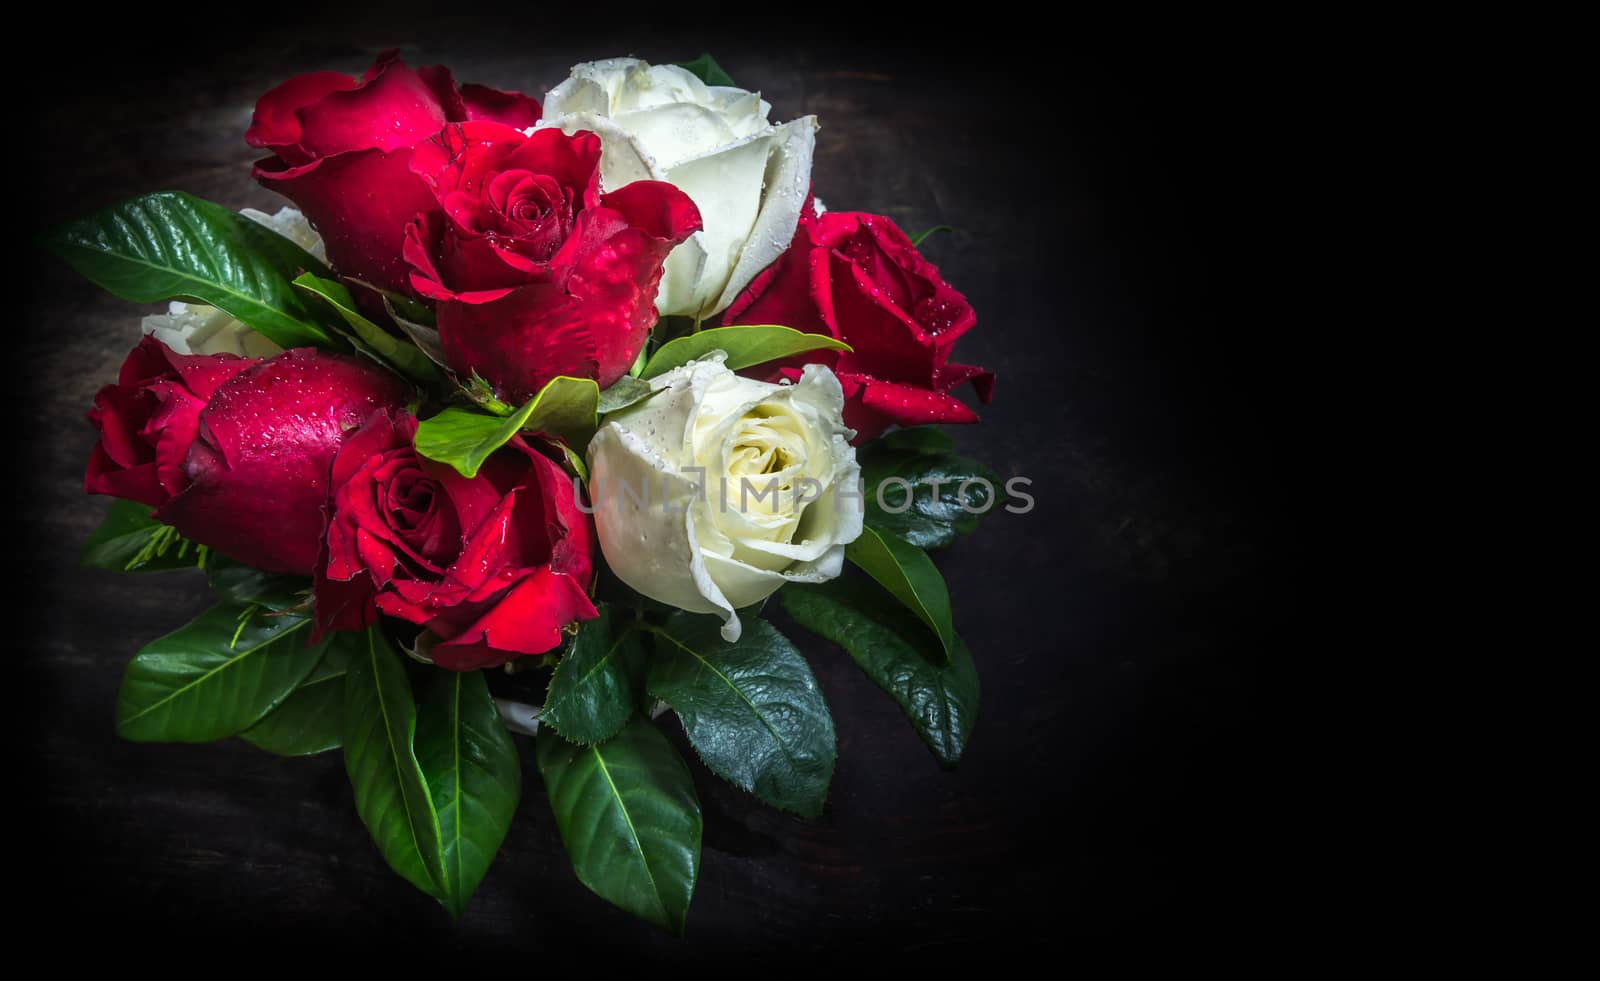 red and white rose with various leaves by matter77